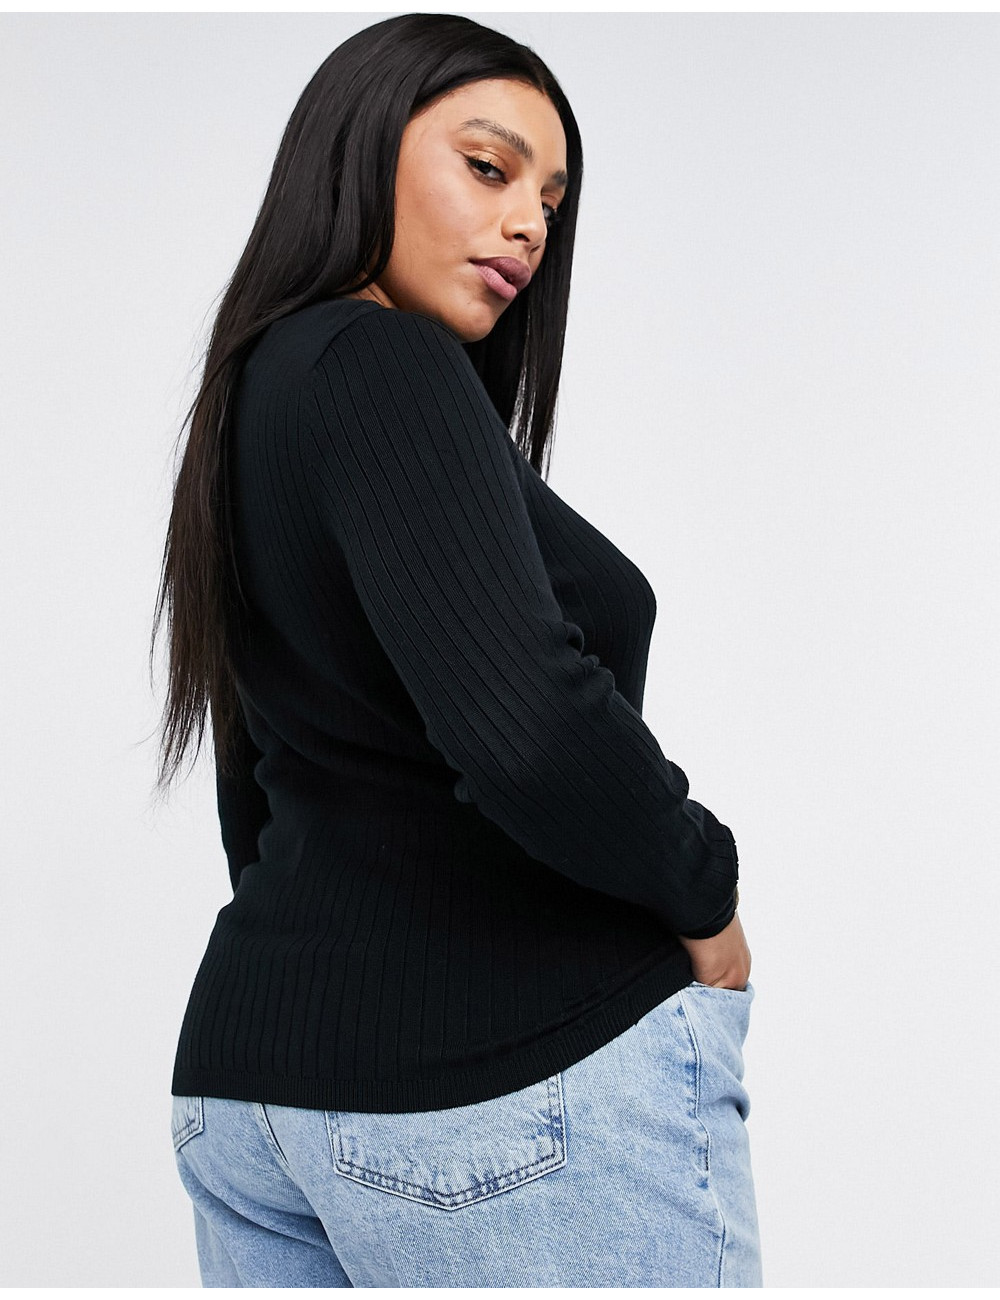 New Look Curve jumper in black